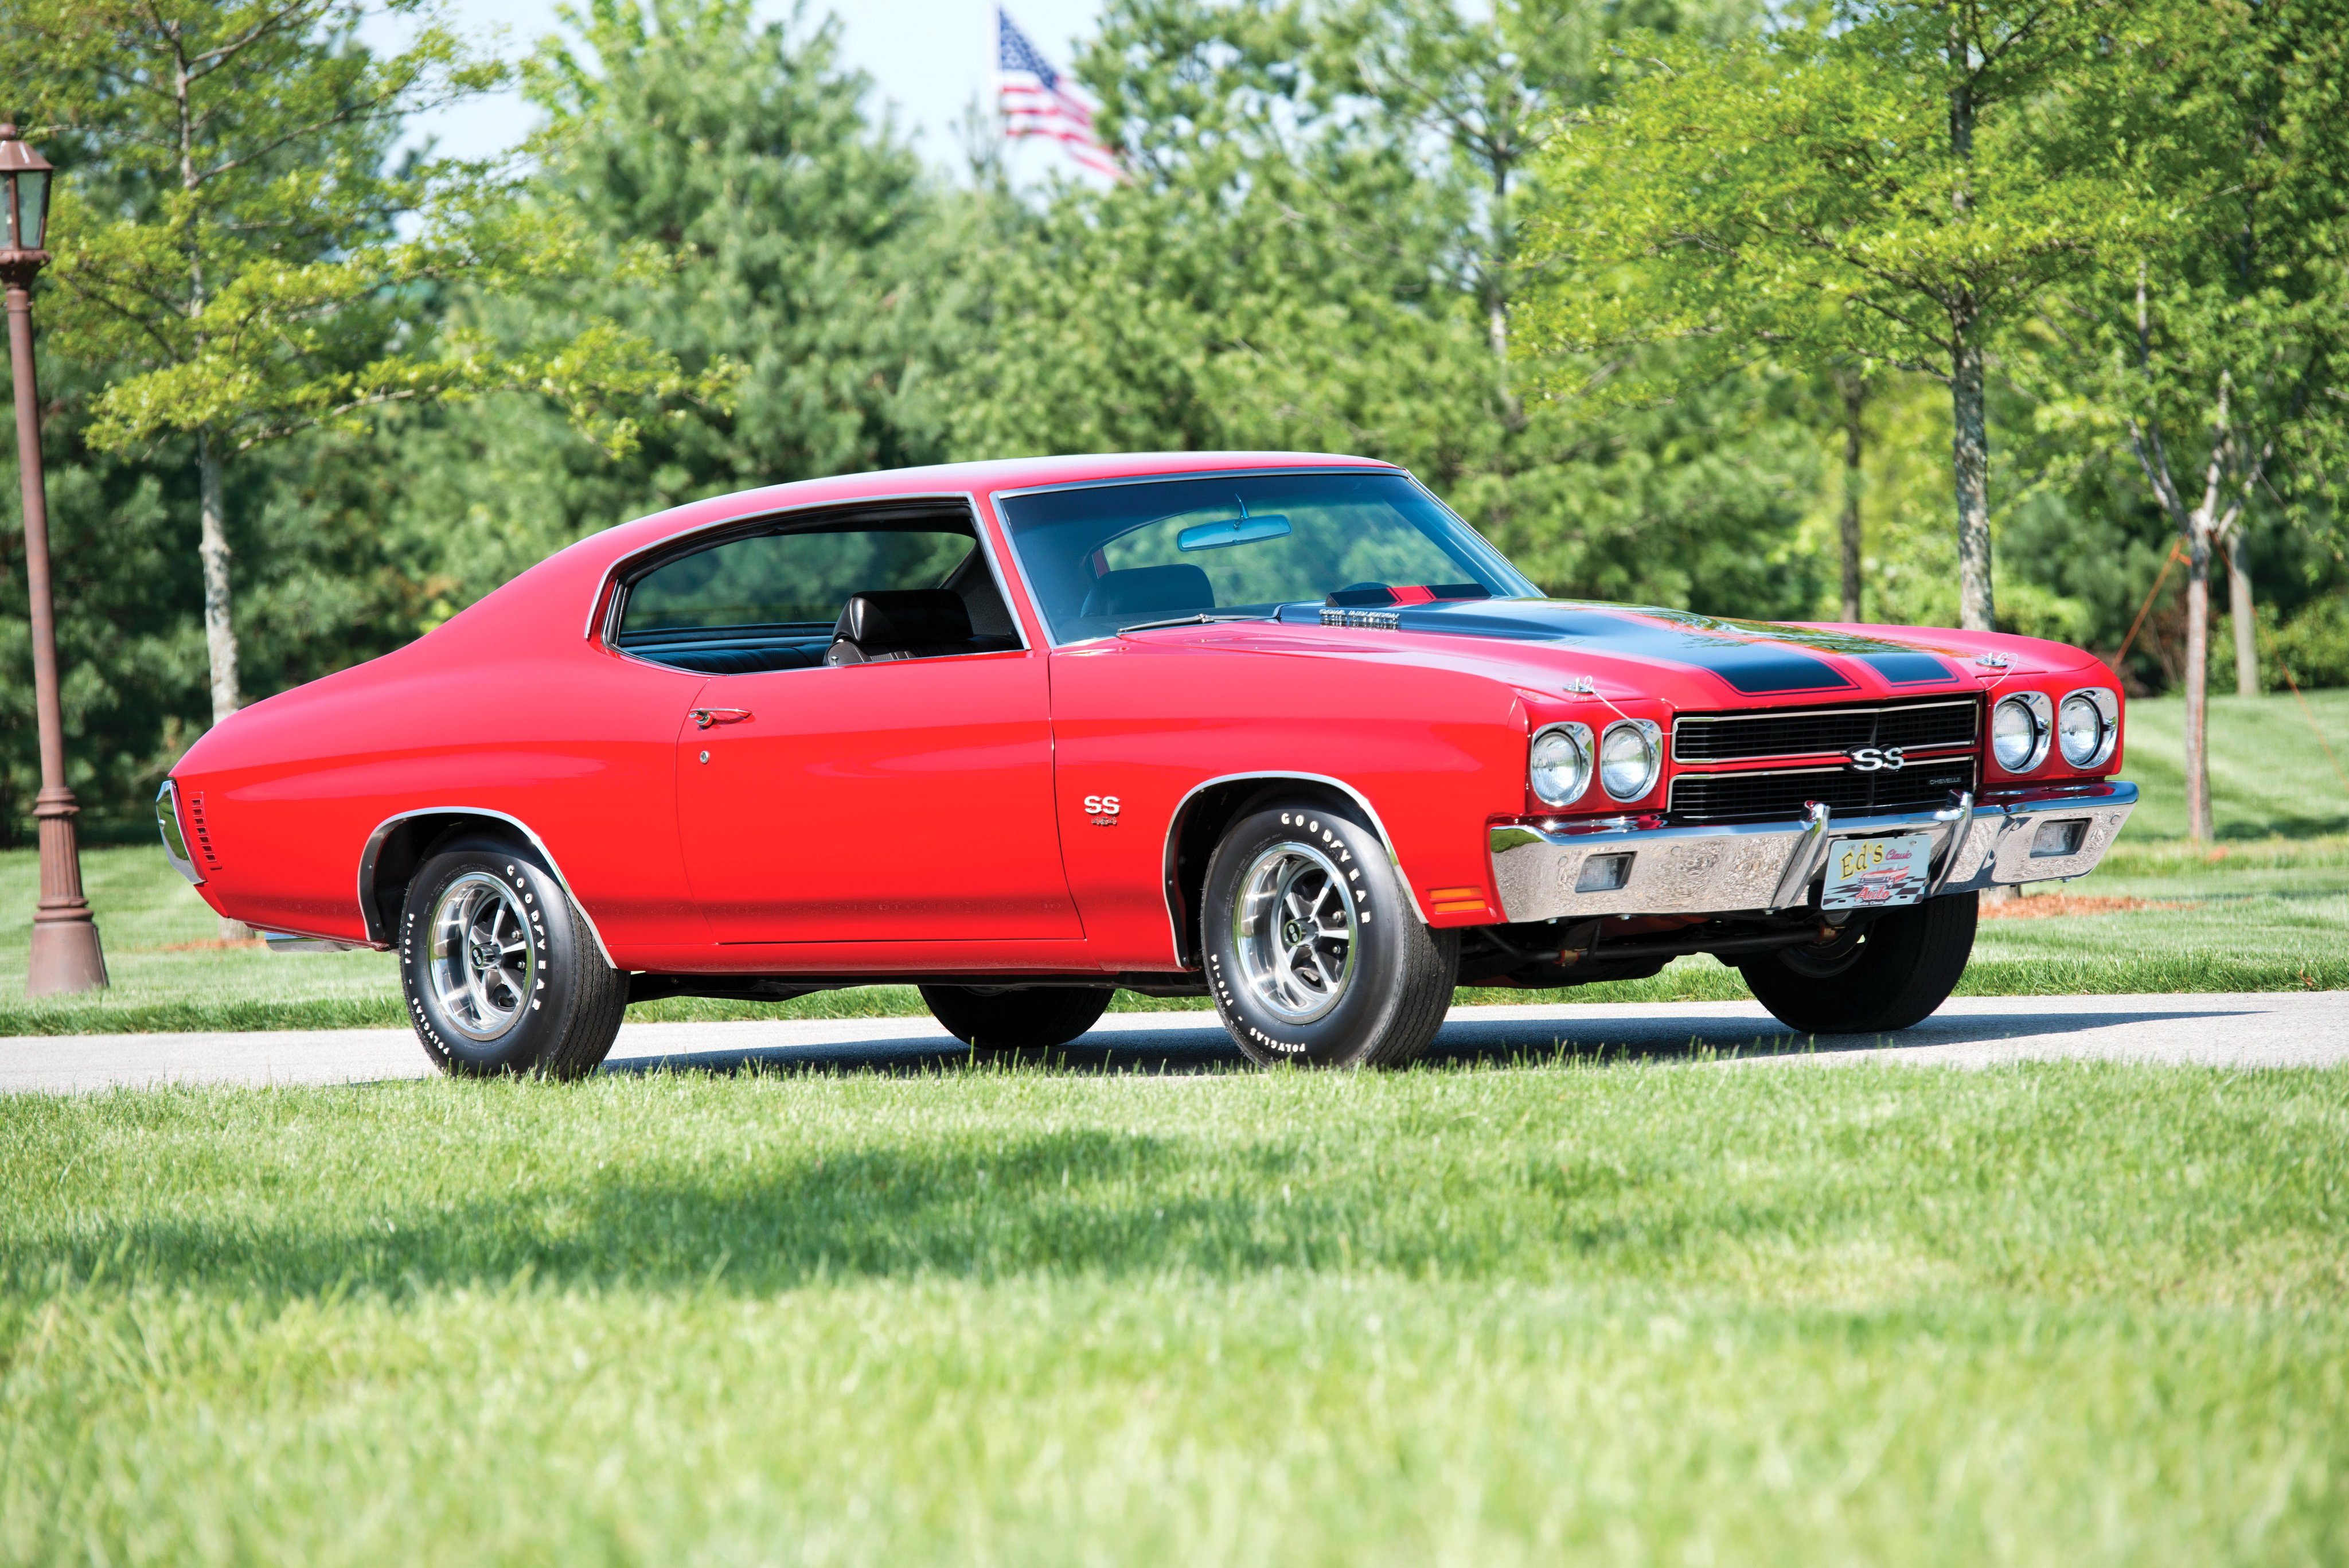 1970, Chevrolet, Chevelle, S s, 454, Ls6, Hardtop, Coupe, 3637, Muscle, Classic Wallpaper